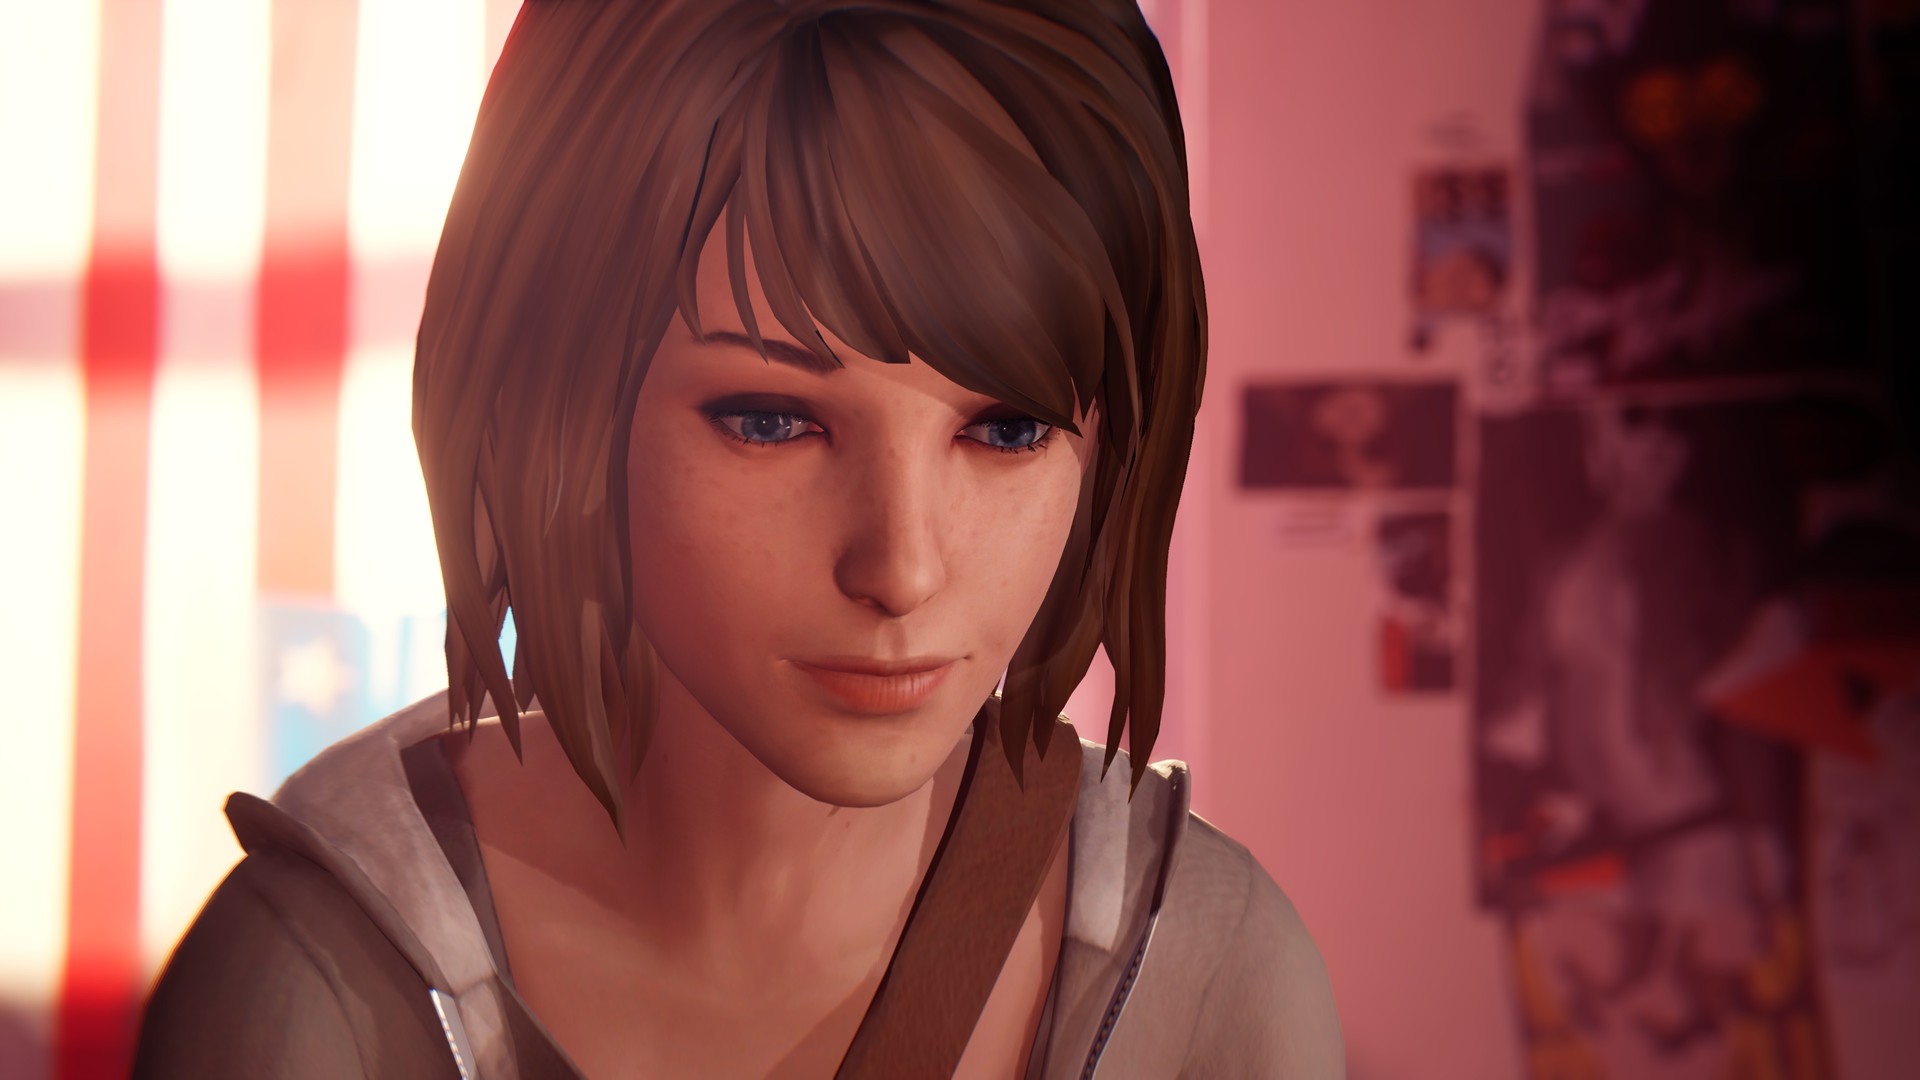 Life Is Strange Remastered Collection AR XBOX One / Xbox Series X,S CD Key